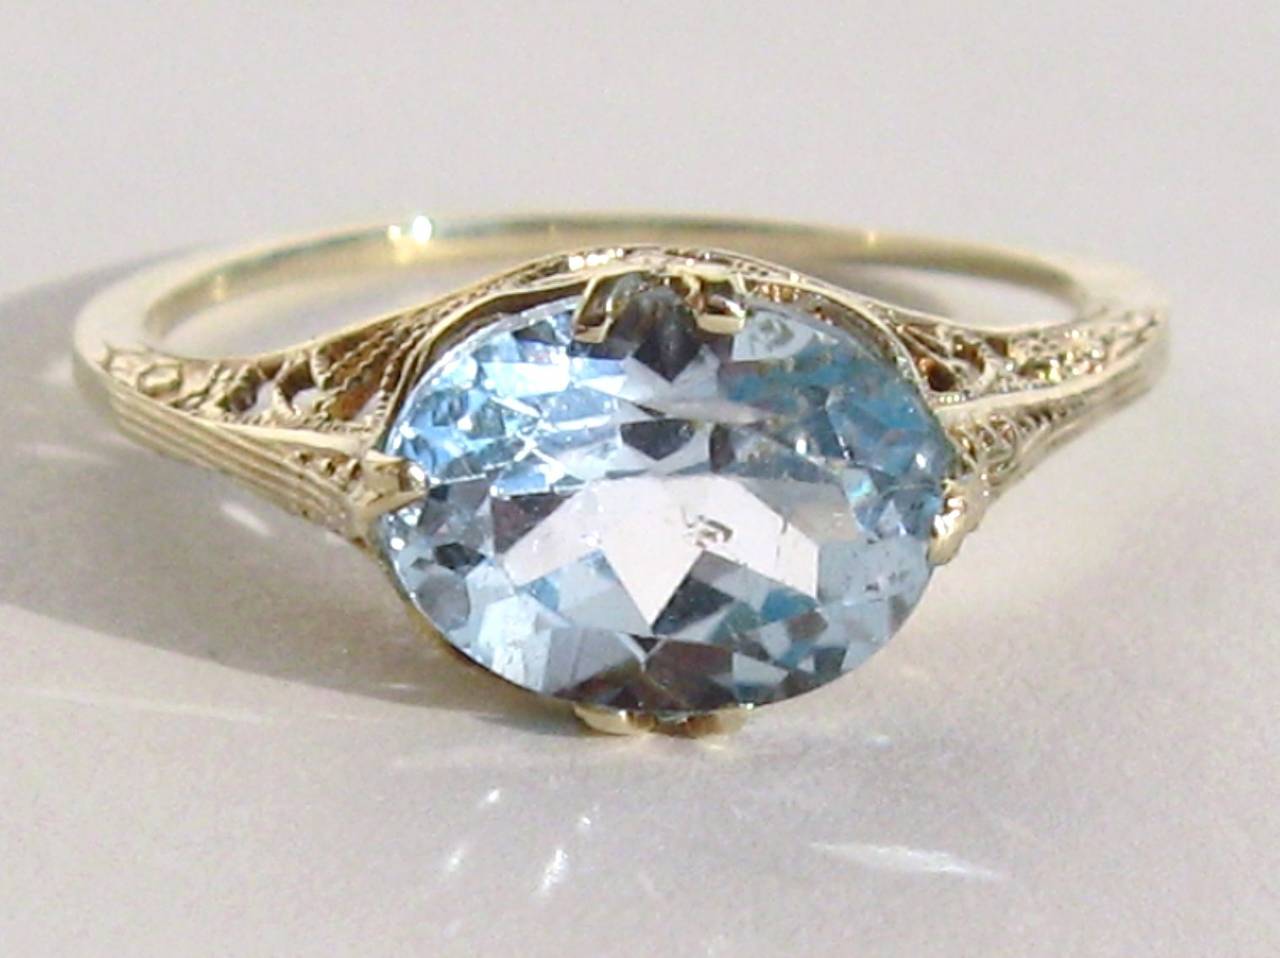 Oval Stone set in 14K yellow gold

Top of ring measures
.41